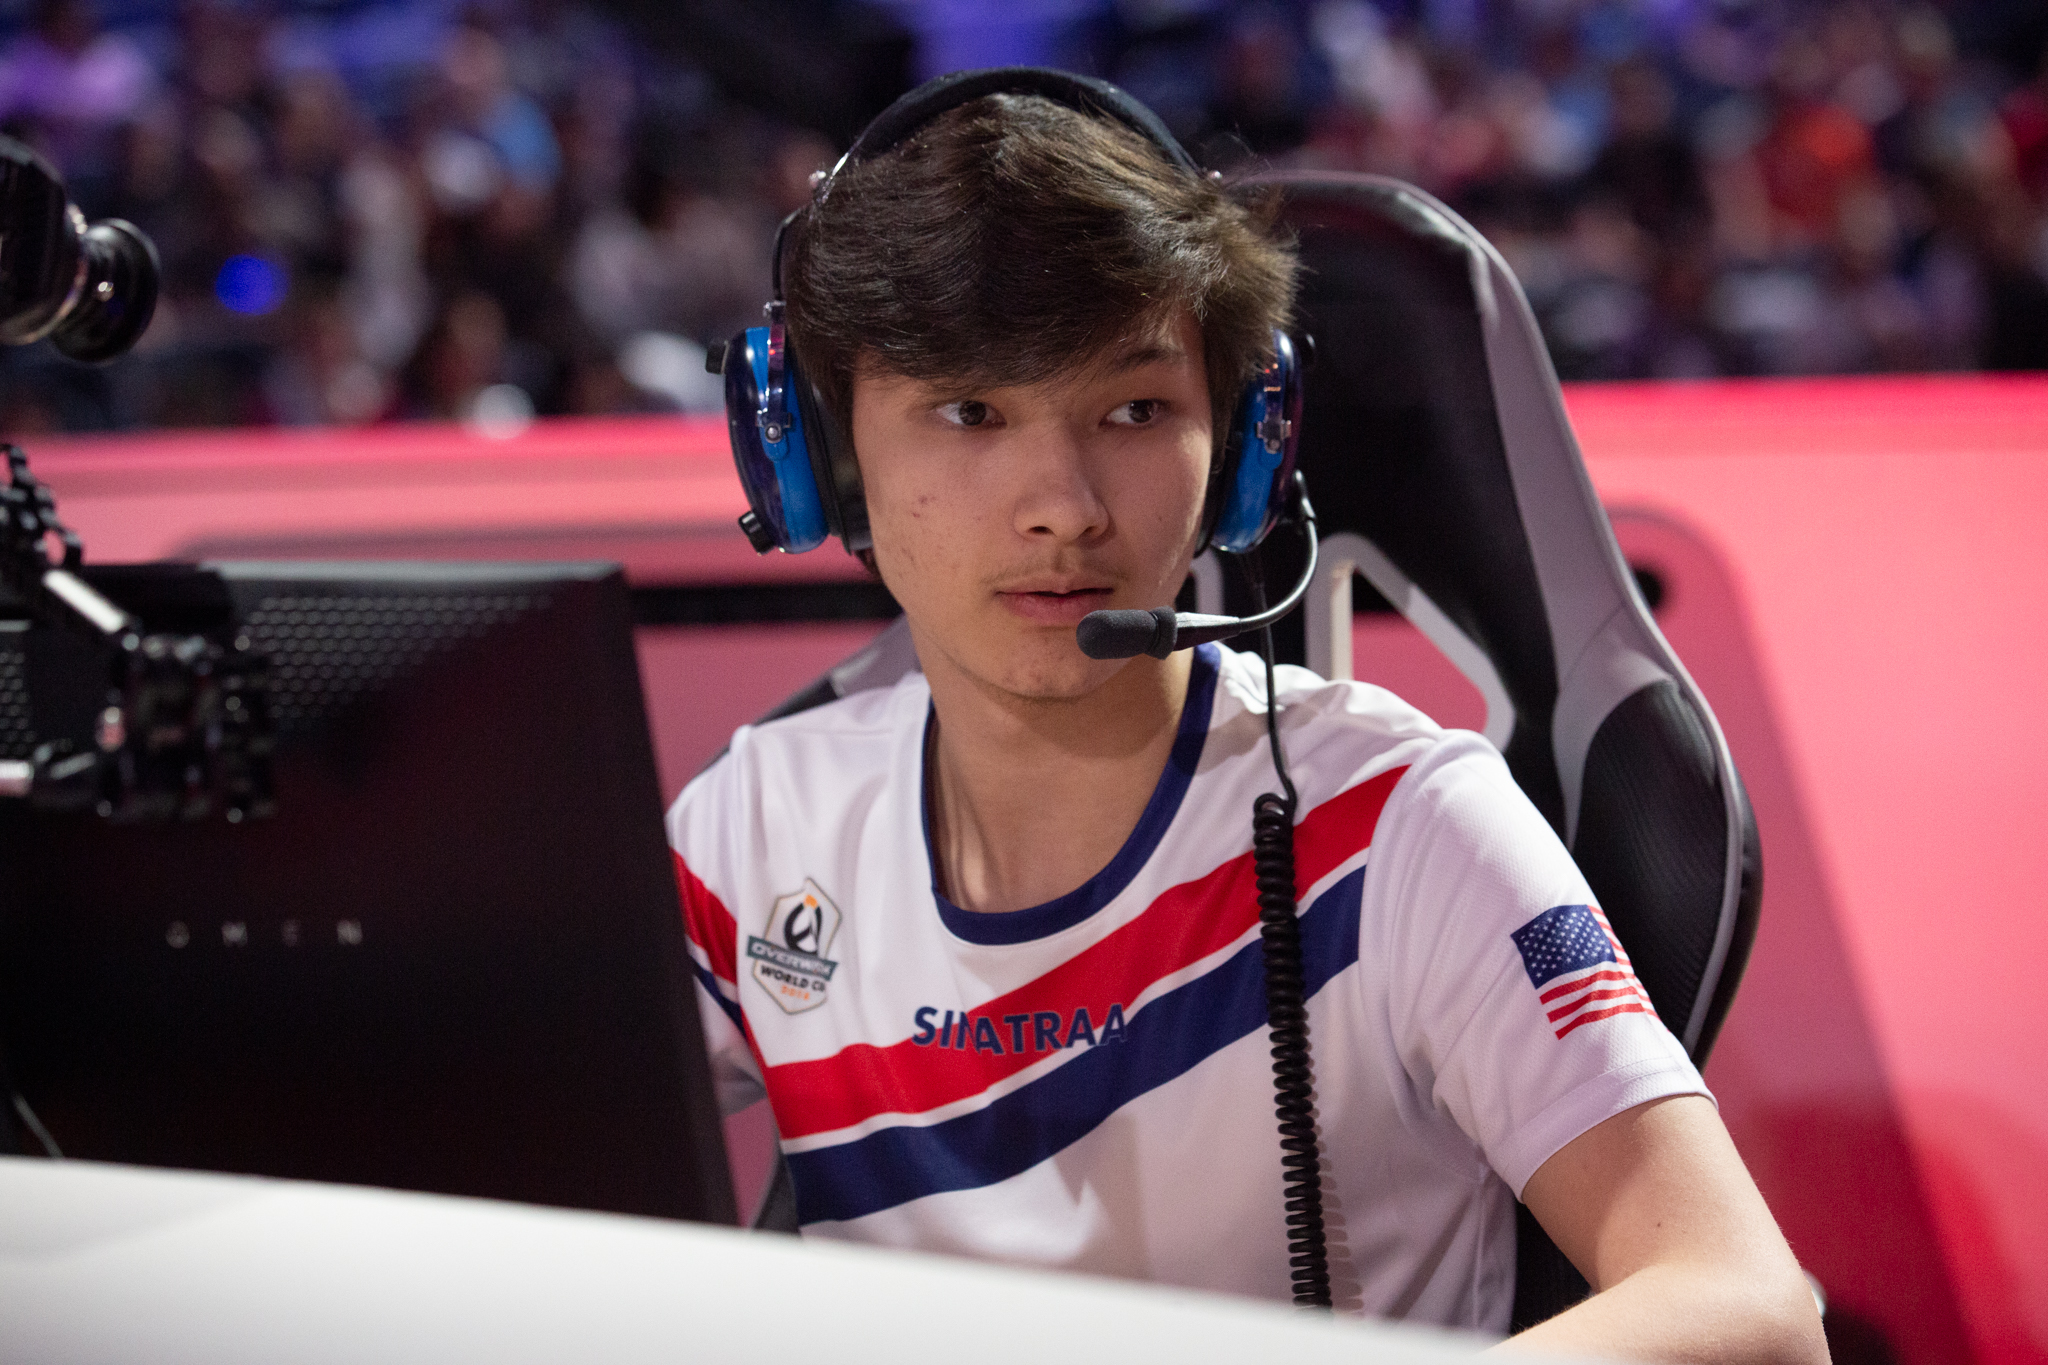 Overwatch player Jay “Sinatraa” Won at a desk wearing a headset